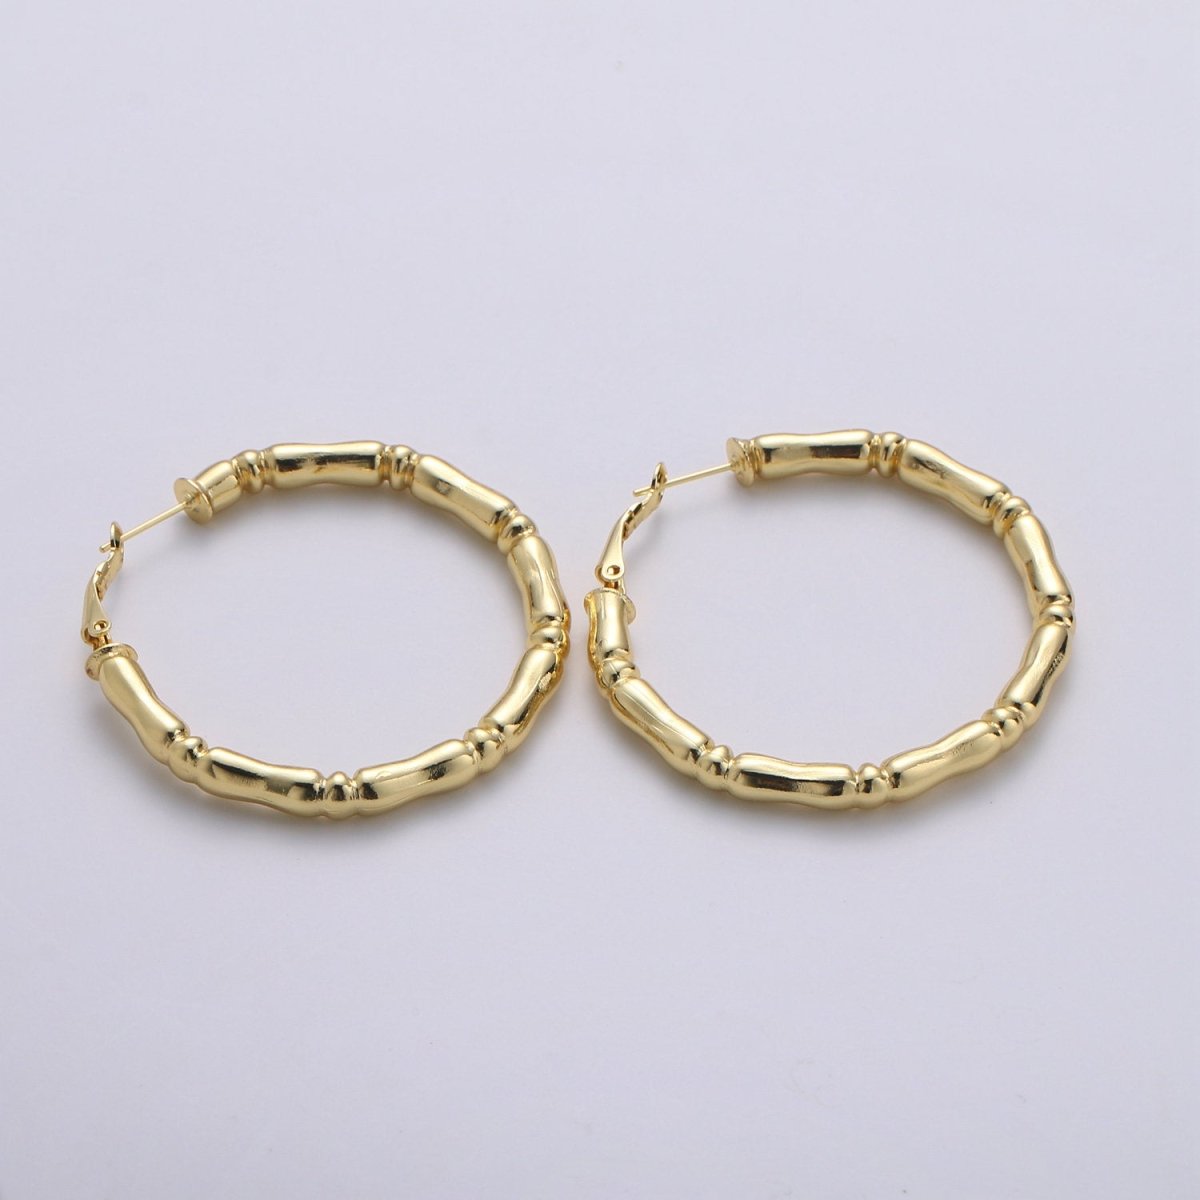 50mm Gold Bamboo Hoop Earring Round Twisted Hoop Earring 14K Gold Plated Statement Jewelry for Teen Women Girl Q-534 - DLUXCA